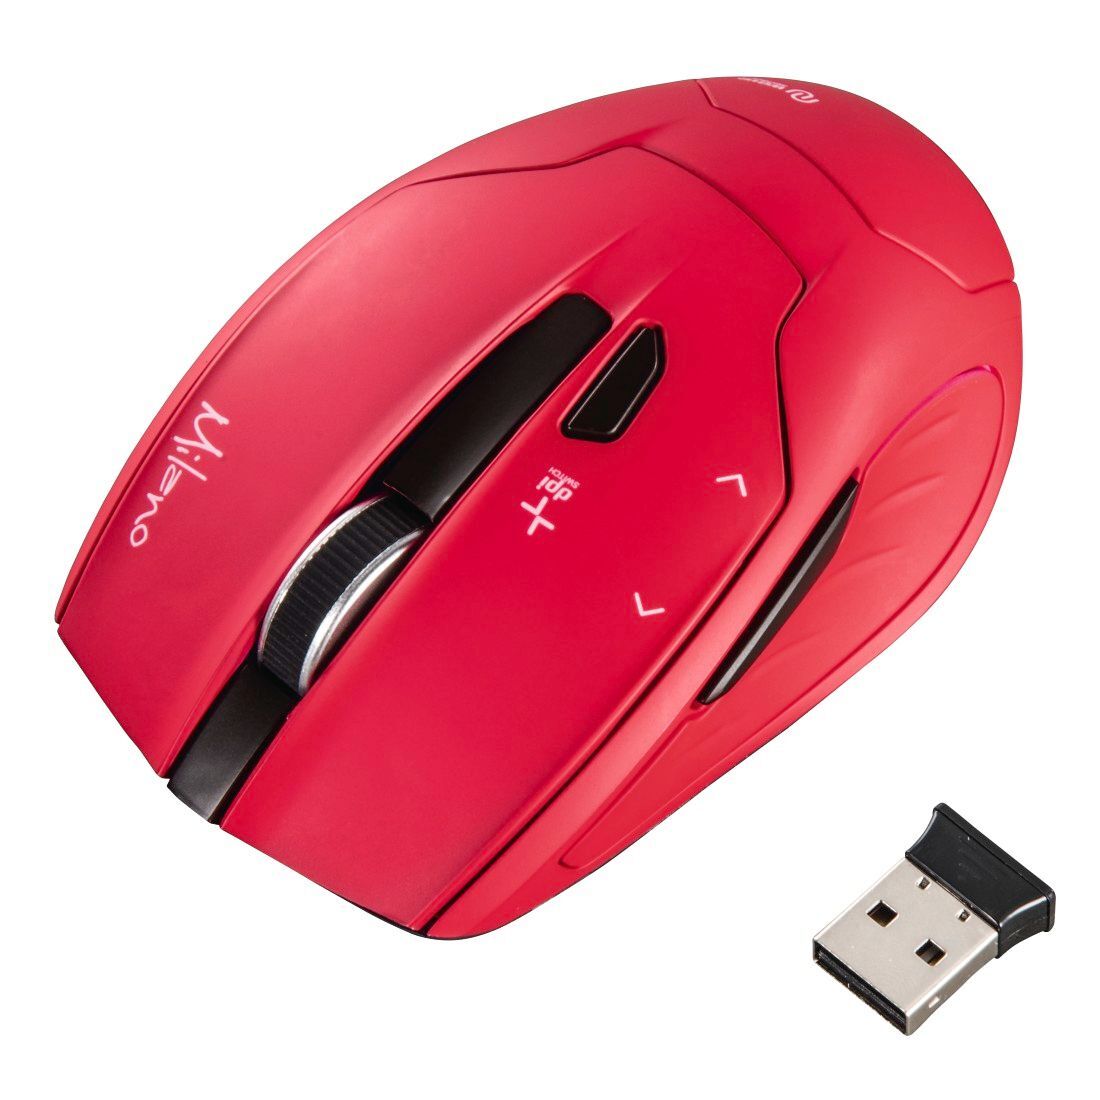 Mouse wireless Milano red Hama